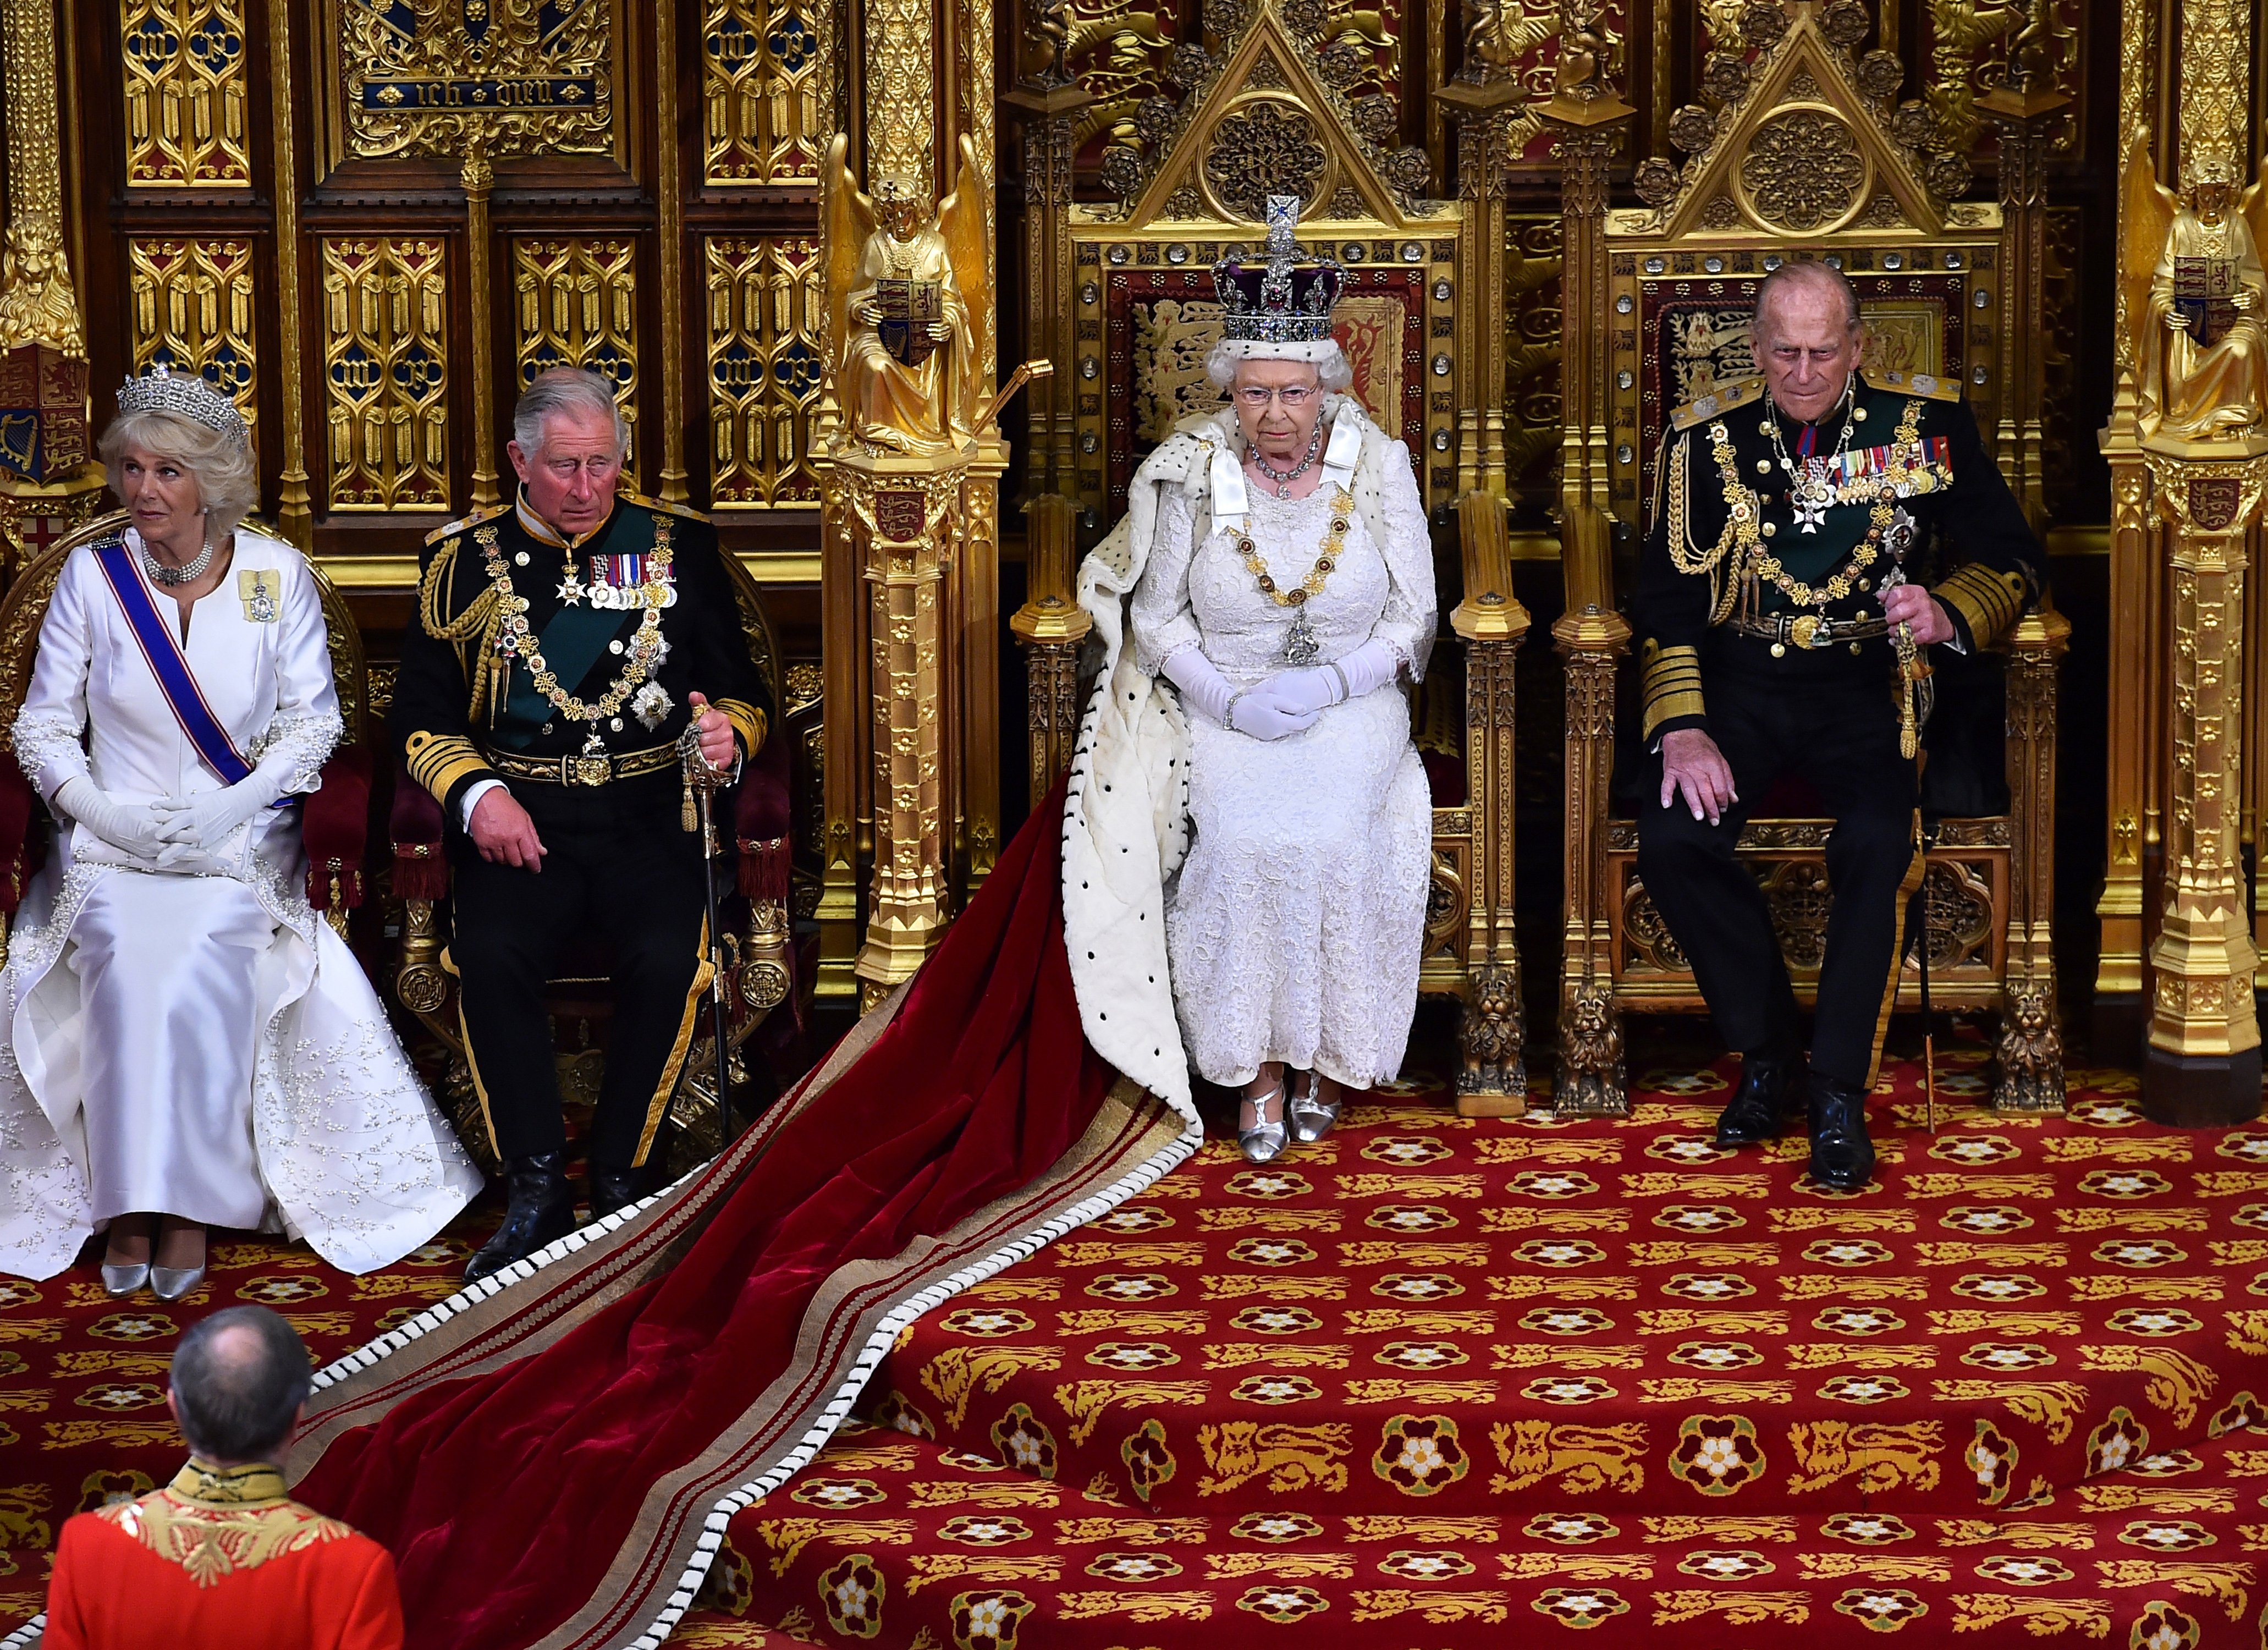 Queen Elizabeth II in the House of Lords alongside Prince Philip, King Charles lll and Queen Consort Camilla Parker-Bowles during the State Opening of Parliament at the Palace of Westminster on May 27, 2015 in London, England. | Source: Getty Images